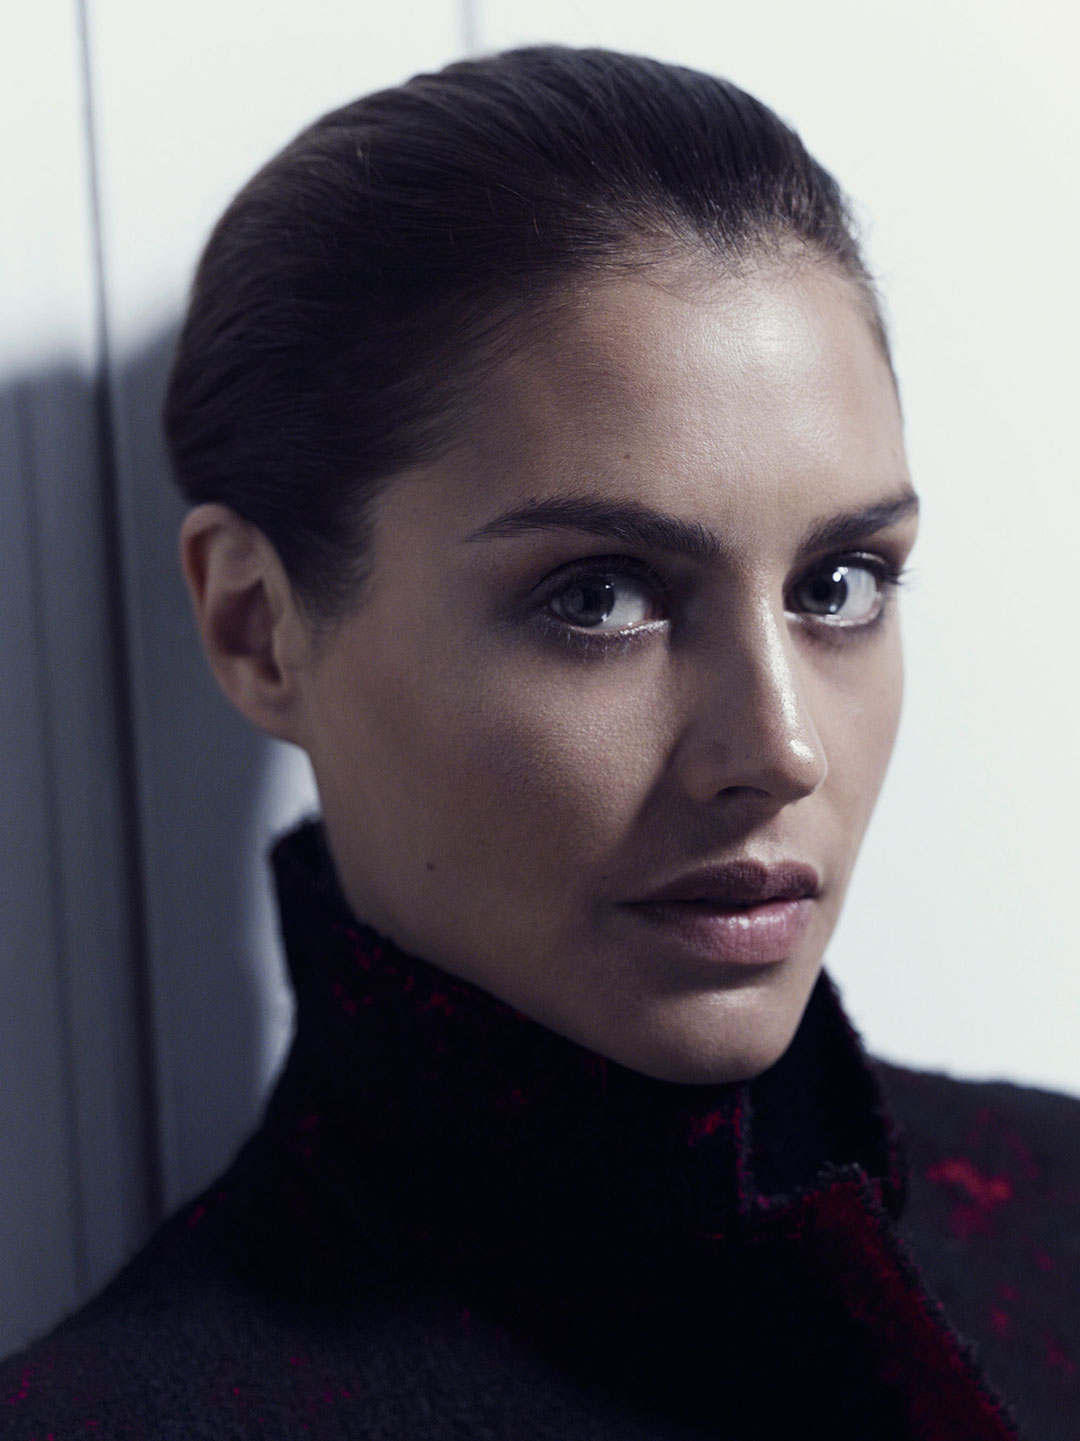 Hannah Ware Beauty Shoot for Yahoo Style Photographed by Alisha Goldstein of Jane Smith Agency